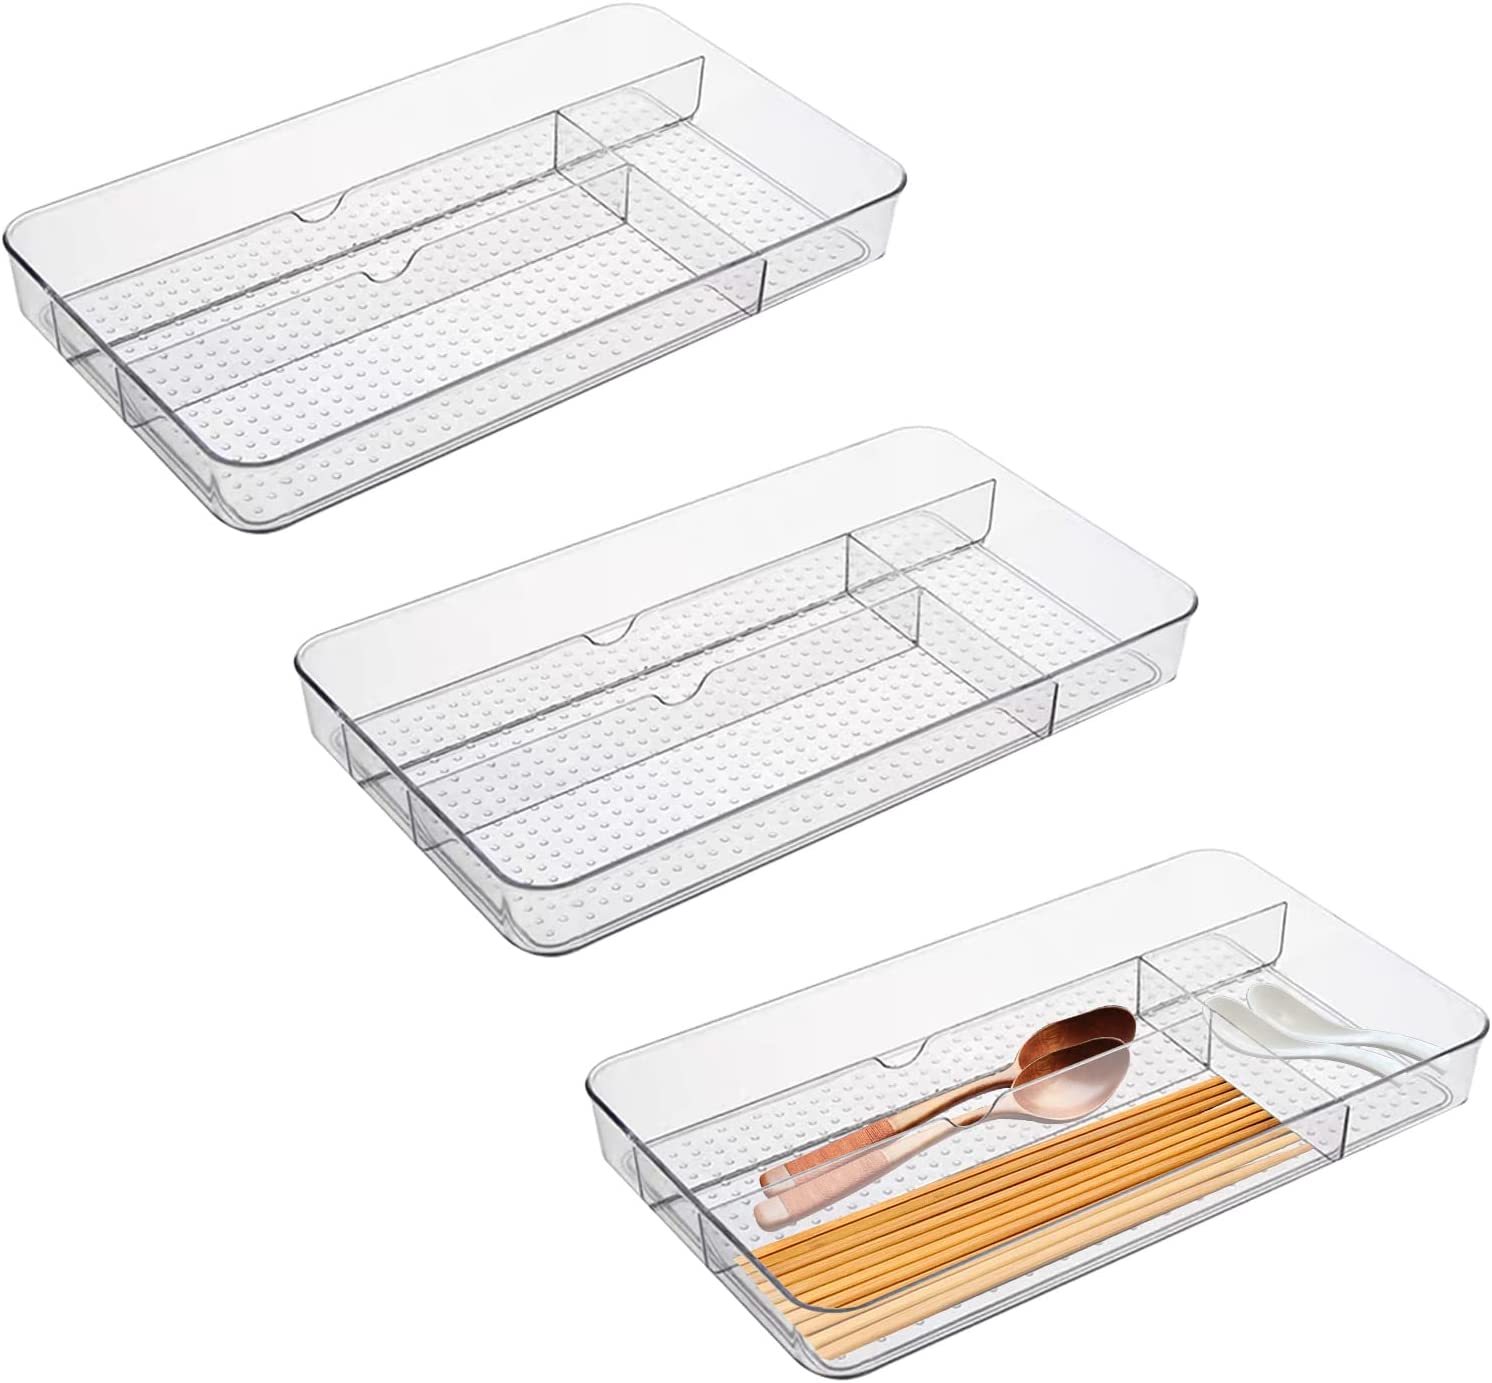 Clear Plastic Desk Drawer Organizer Tray 4 Sections Bathroom Office Kitchen Storage Bins Container for Dresser Cosmetics